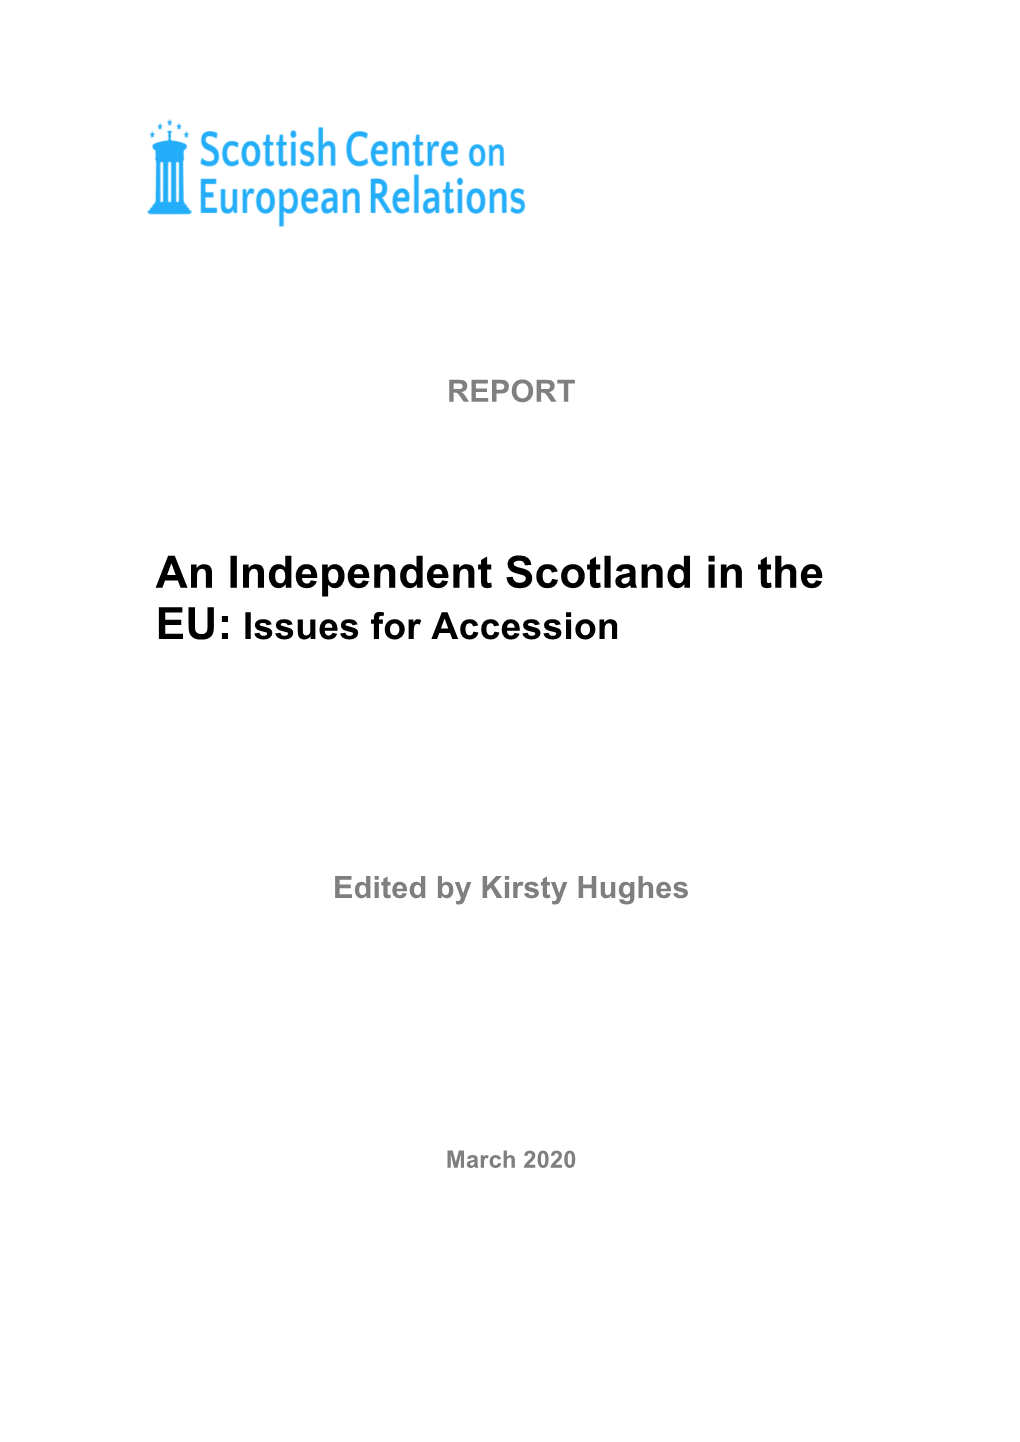 An Independent Scotland in the EU: Issues for Accession